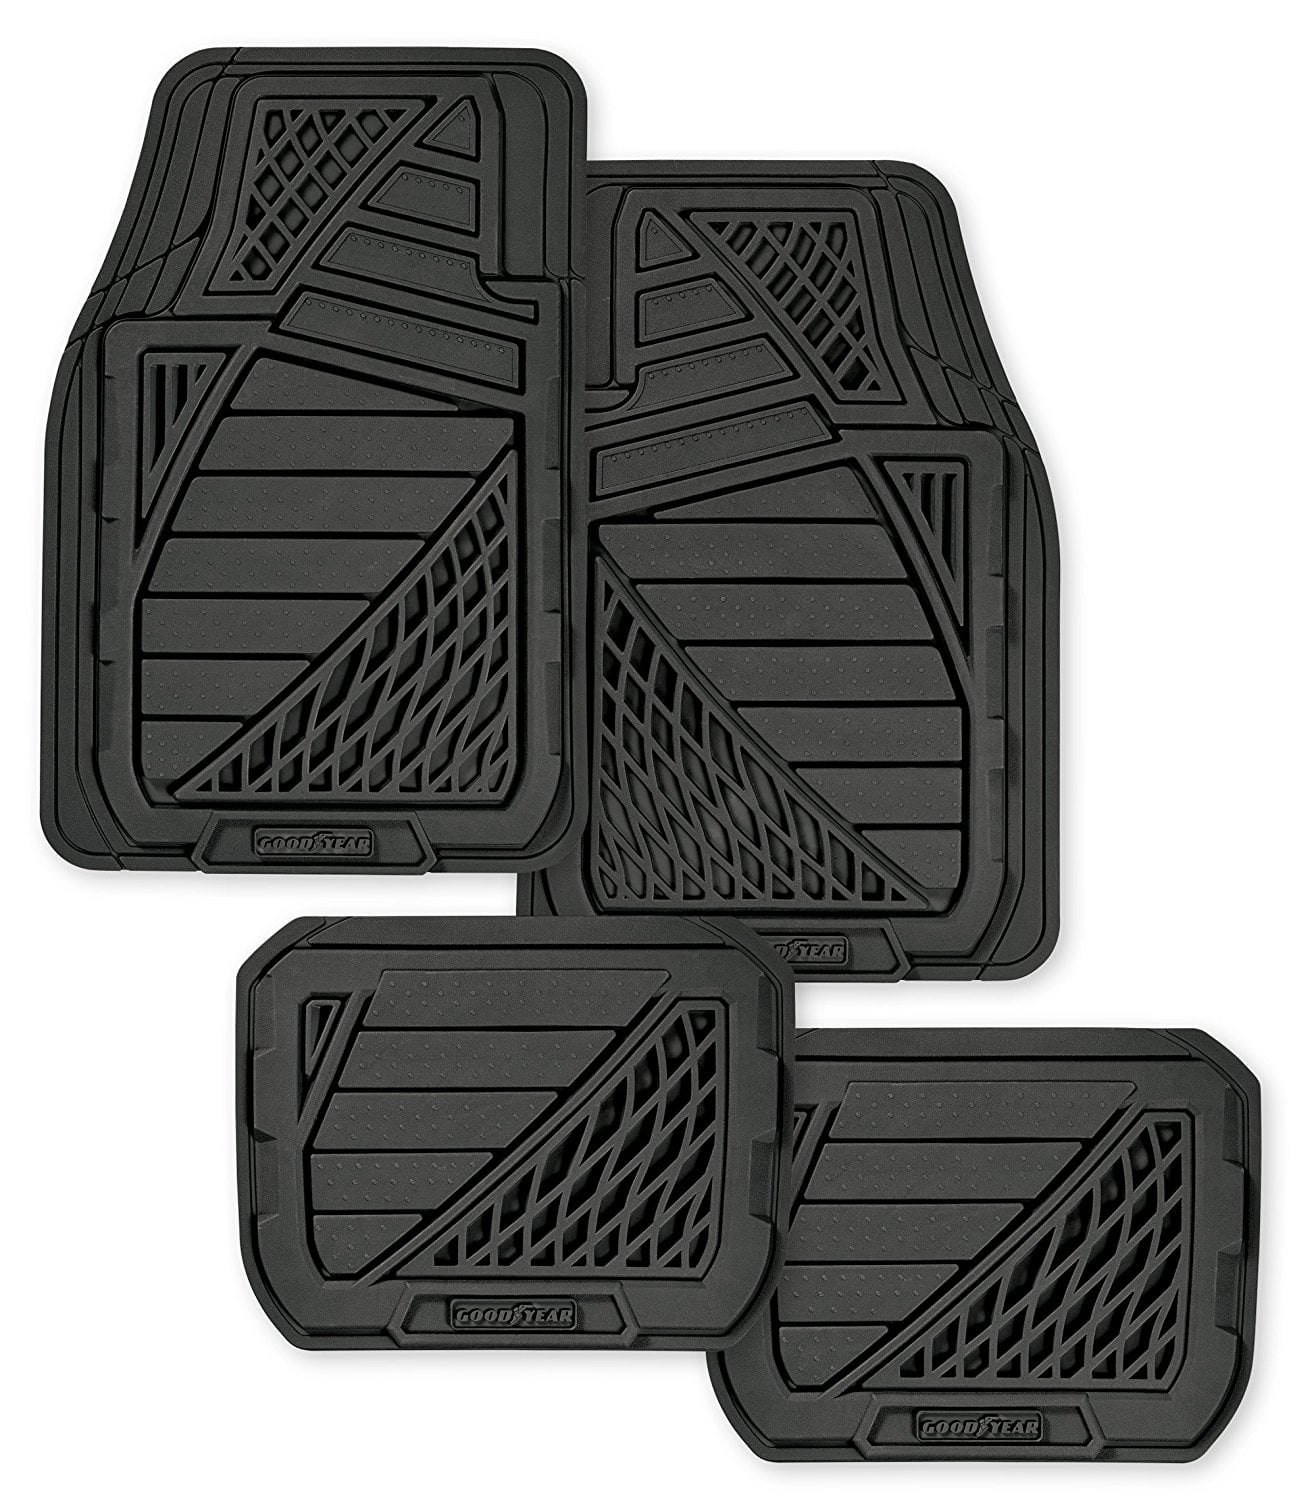 Goodyear GY6204 Premium Heavy Duty 4 Piece Rubber Car Floor Mat and Snow Spills Made with a Raised Moisture Barrier to Shield Floor Surfaces from Rain Black 